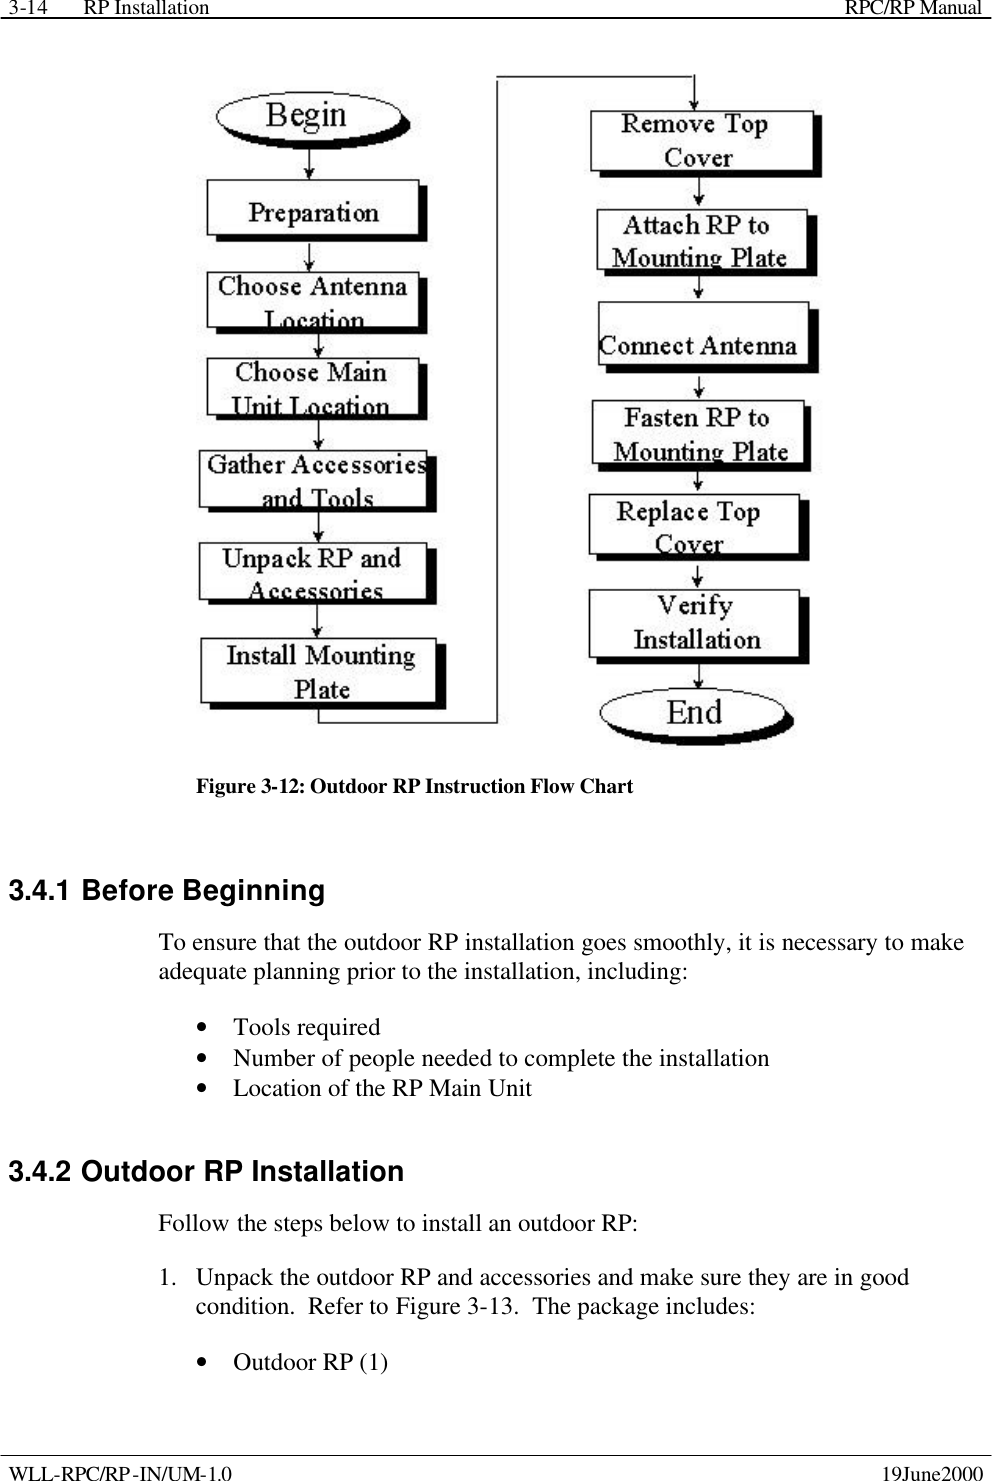 RP Installation    RPC/RP Manual WLL-RPC/RP-IN/UM-1.0    19June2000 3-14 Figure 3-12: Outdoor RP Instruction Flow Chart 3.4.1 Before Beginning To ensure that the outdoor RP installation goes smoothly, it is necessary to make adequate planning prior to the installation, including:  • Tools required • Number of people needed to complete the installation • Location of the RP Main Unit 3.4.2 Outdoor RP Installation Follow the steps below to install an outdoor RP: 1.  Unpack the outdoor RP and accessories and make sure they are in good condition.  Refer to Figure 3-13.  The package includes: • Outdoor RP (1) 